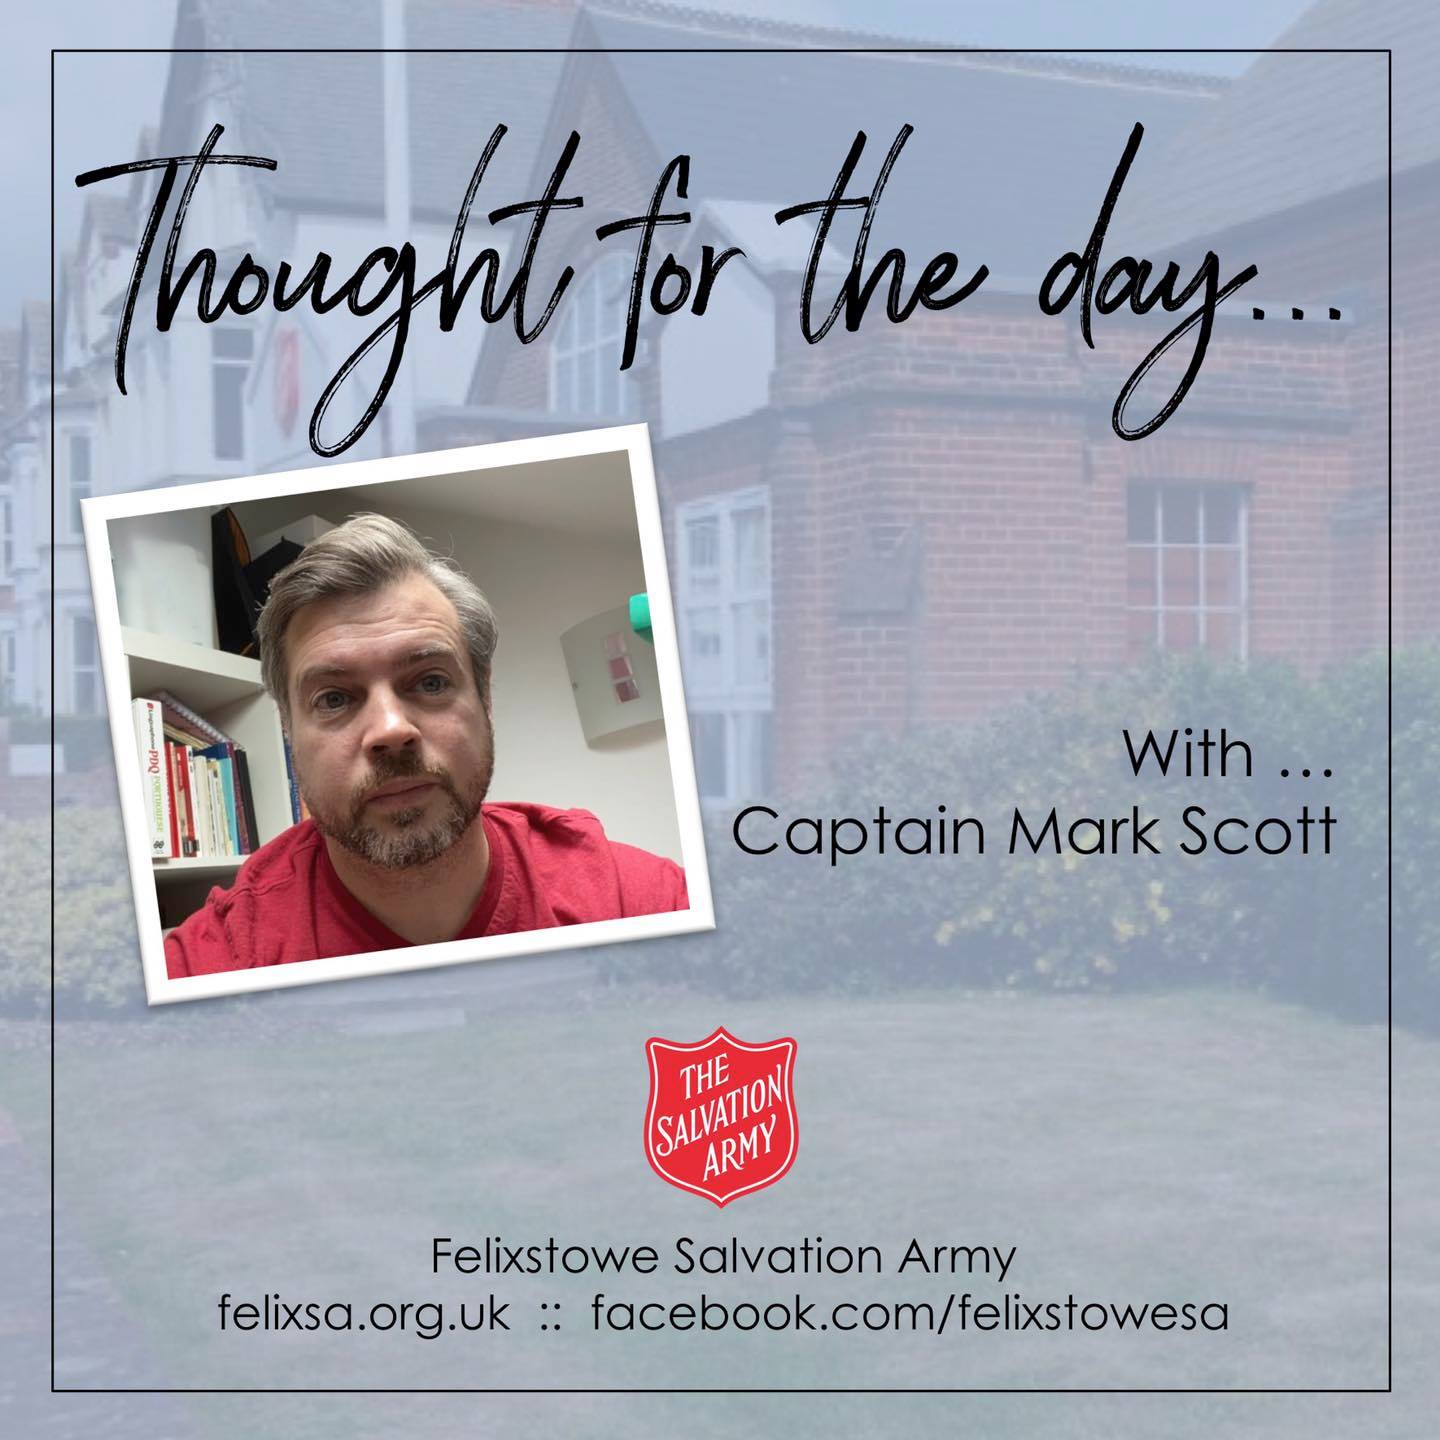 Thought for the Day with Captain Mark Scott